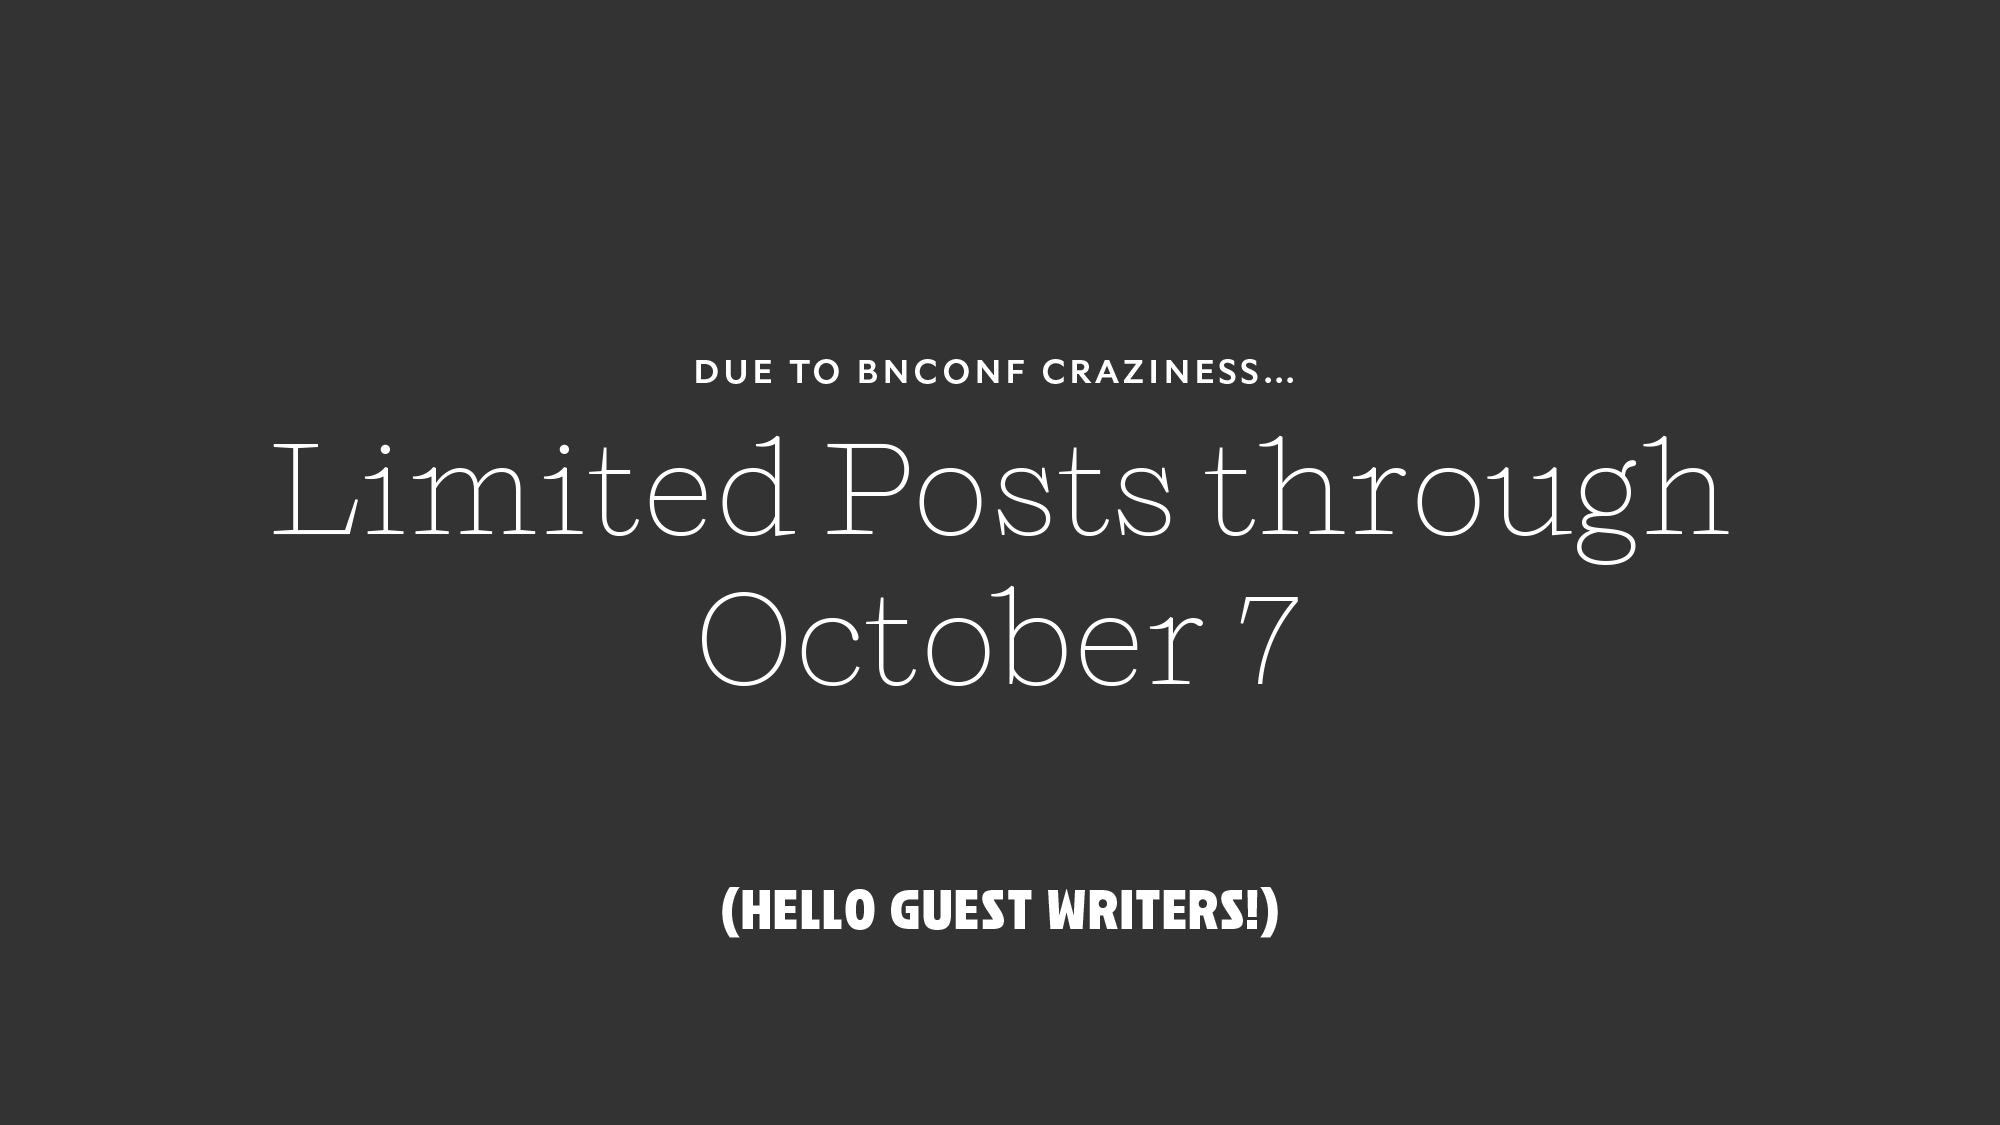 Limited Posts through October 7